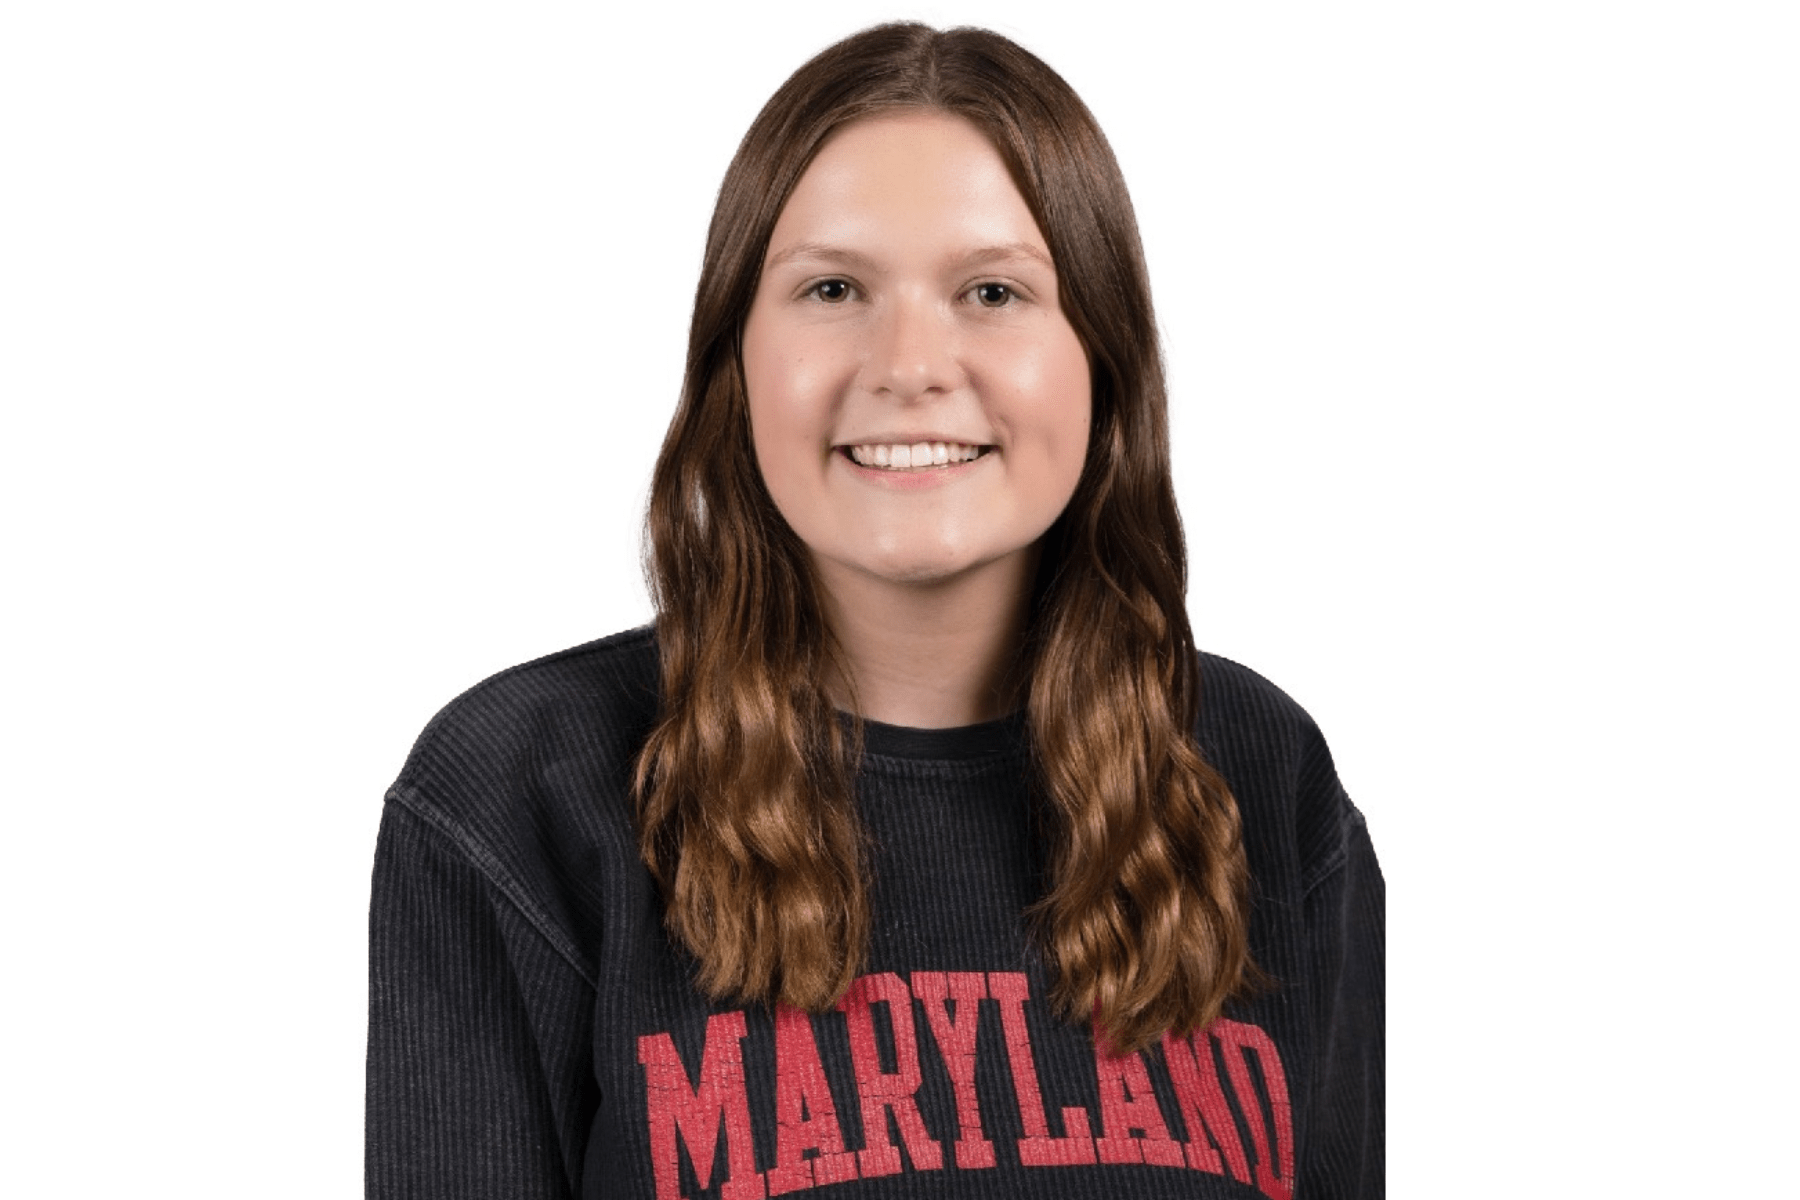 Jenna is pictured wearing a Maryland sweatshirt smiling at the camera.